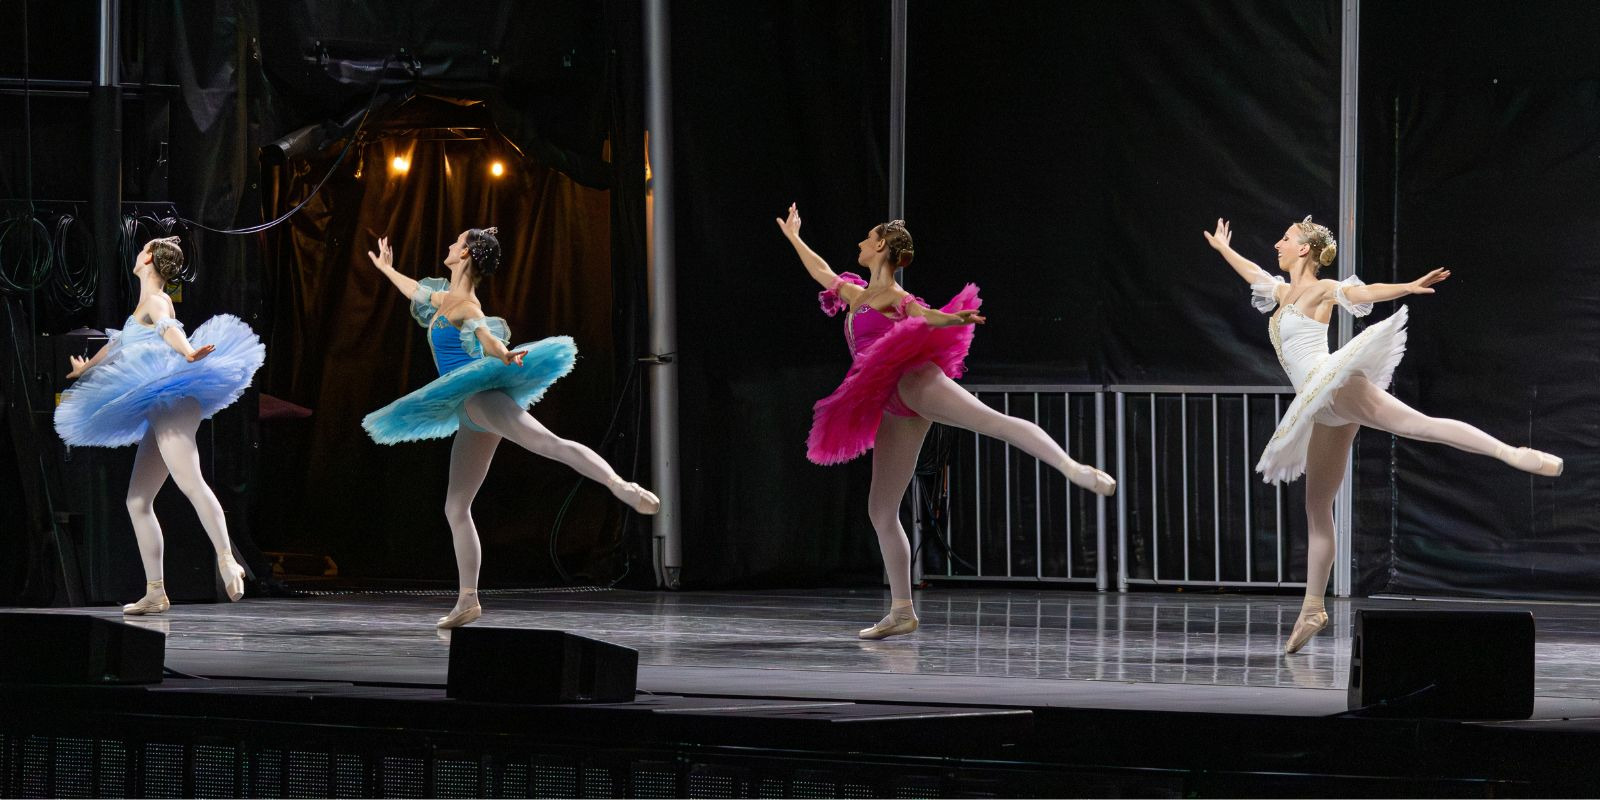 Members of First State Ballet perform on stage in white tutus and small crowns.